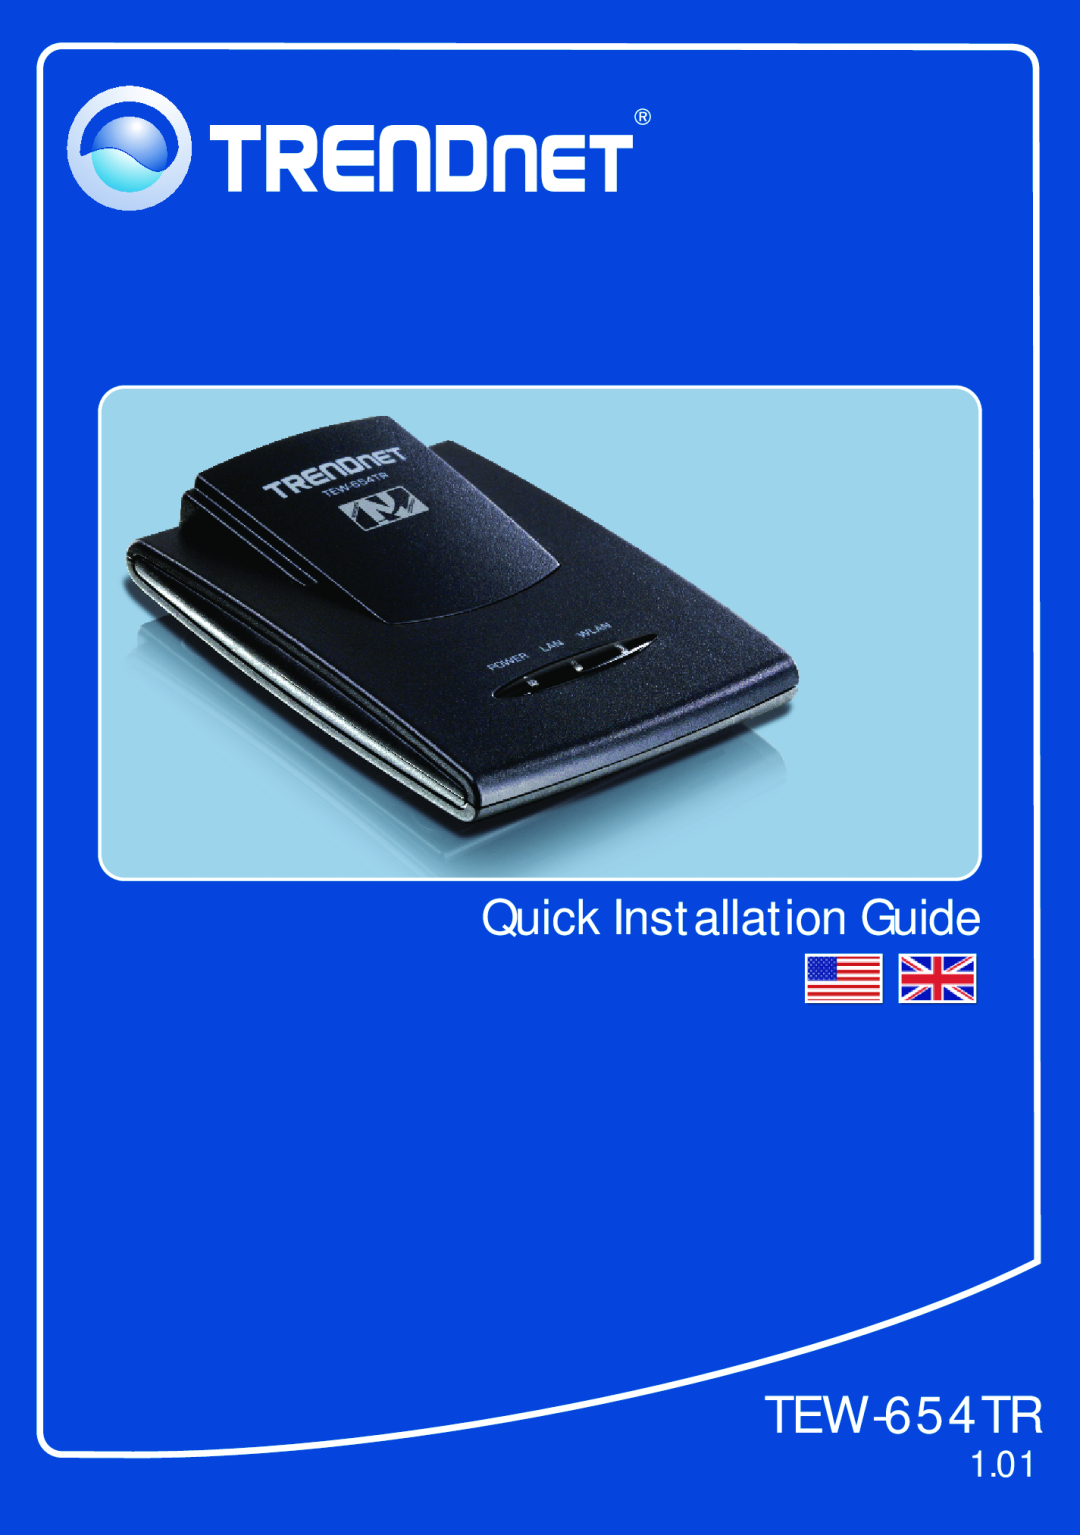 TRENDnet TEW-654TR manual Quick Installation Guide, 1.01 